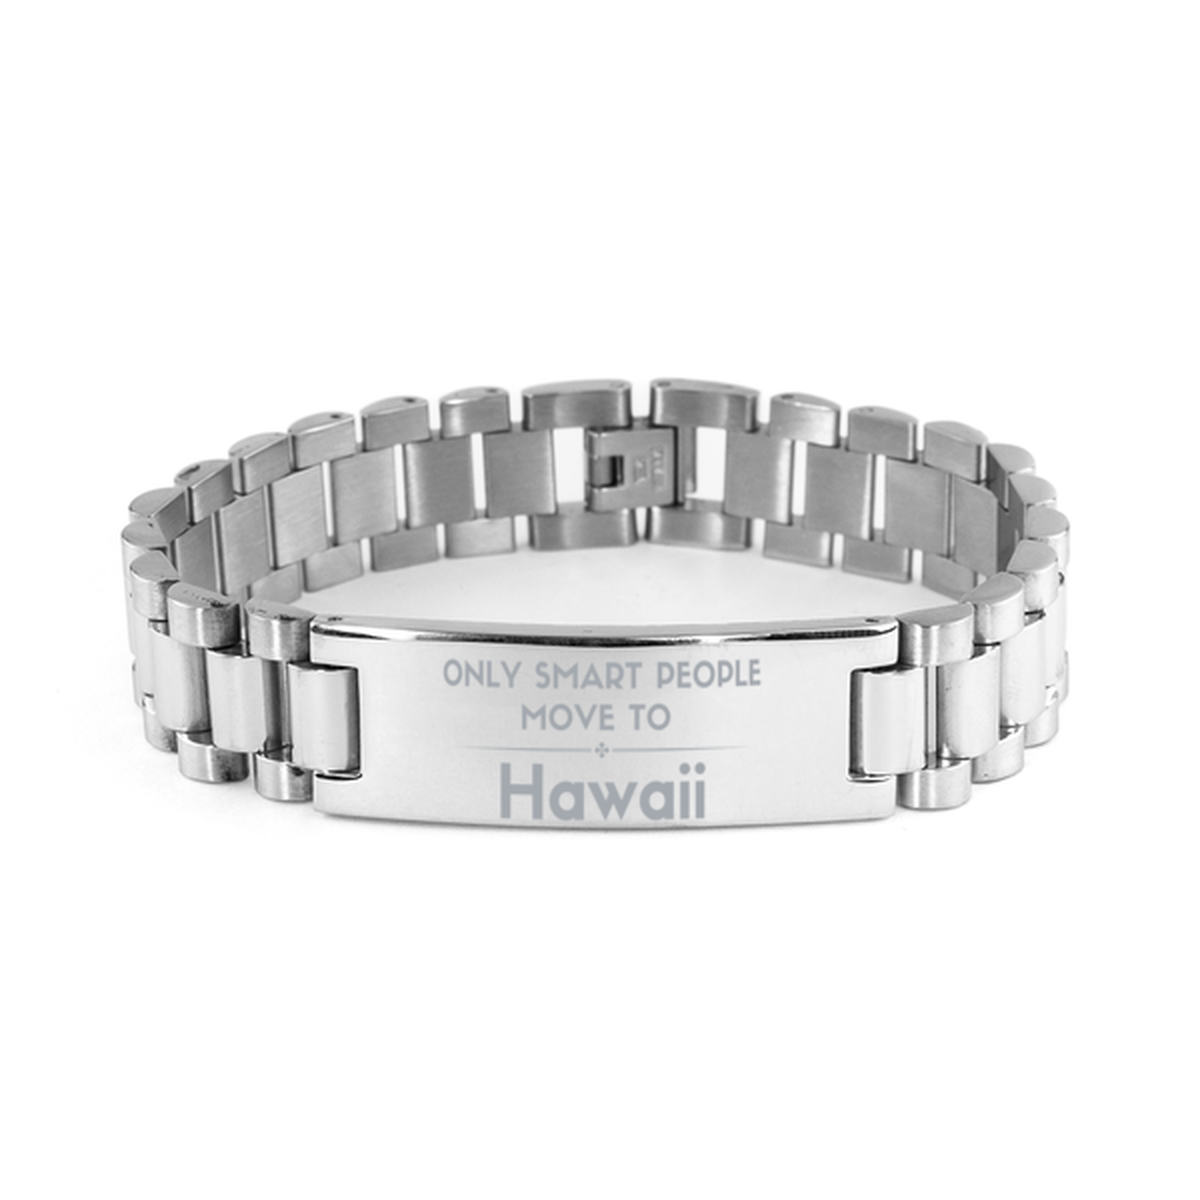 Only smart people move to Hawaii Ladder Stainless Steel Bracelet, Gag Gifts For Hawaii, Move to Hawaii Gifts for Friends Coworker Funny Saying Quote